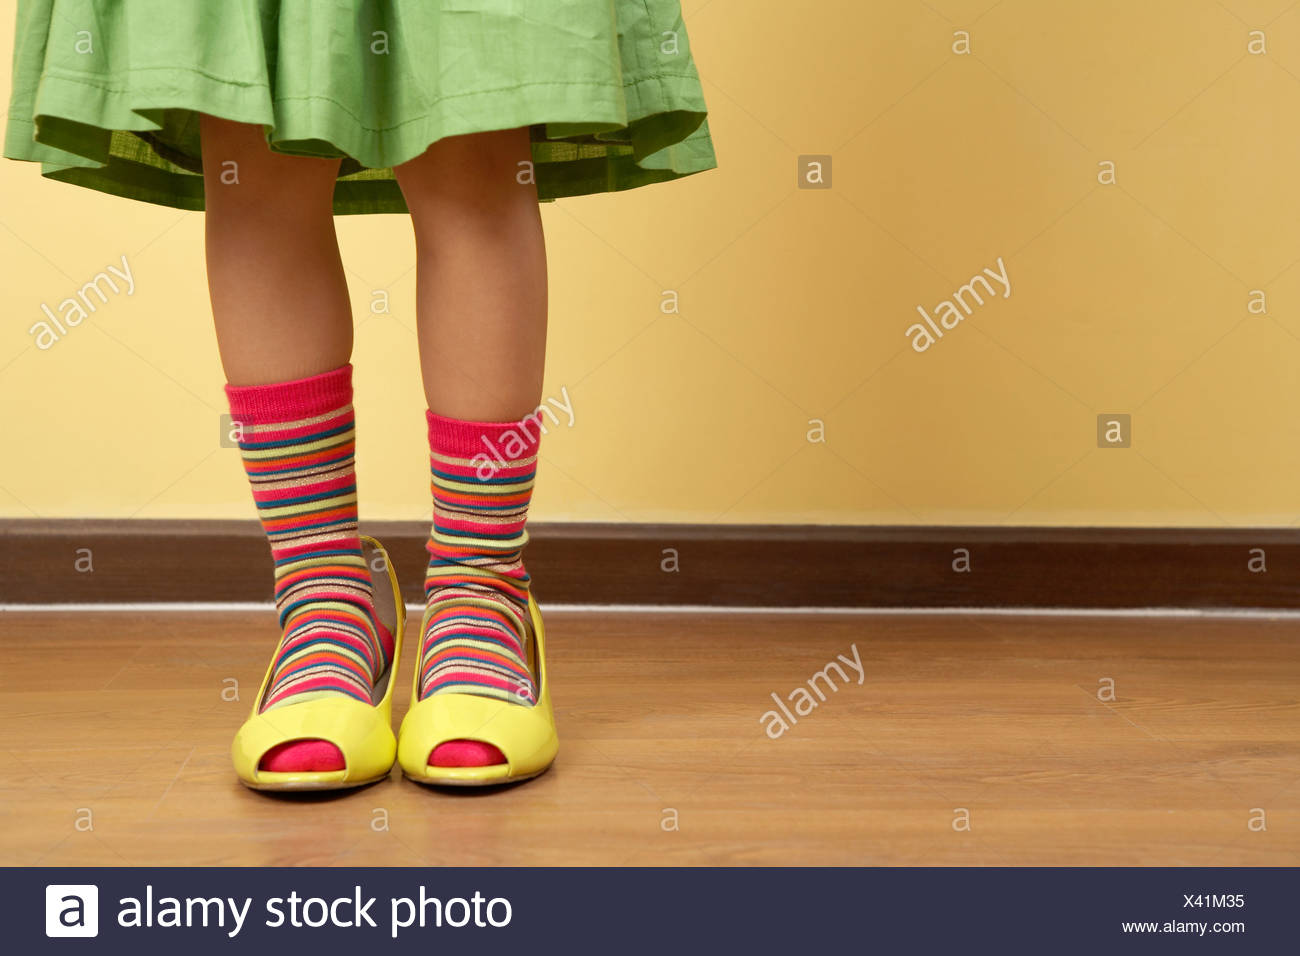 girls shoes and socks